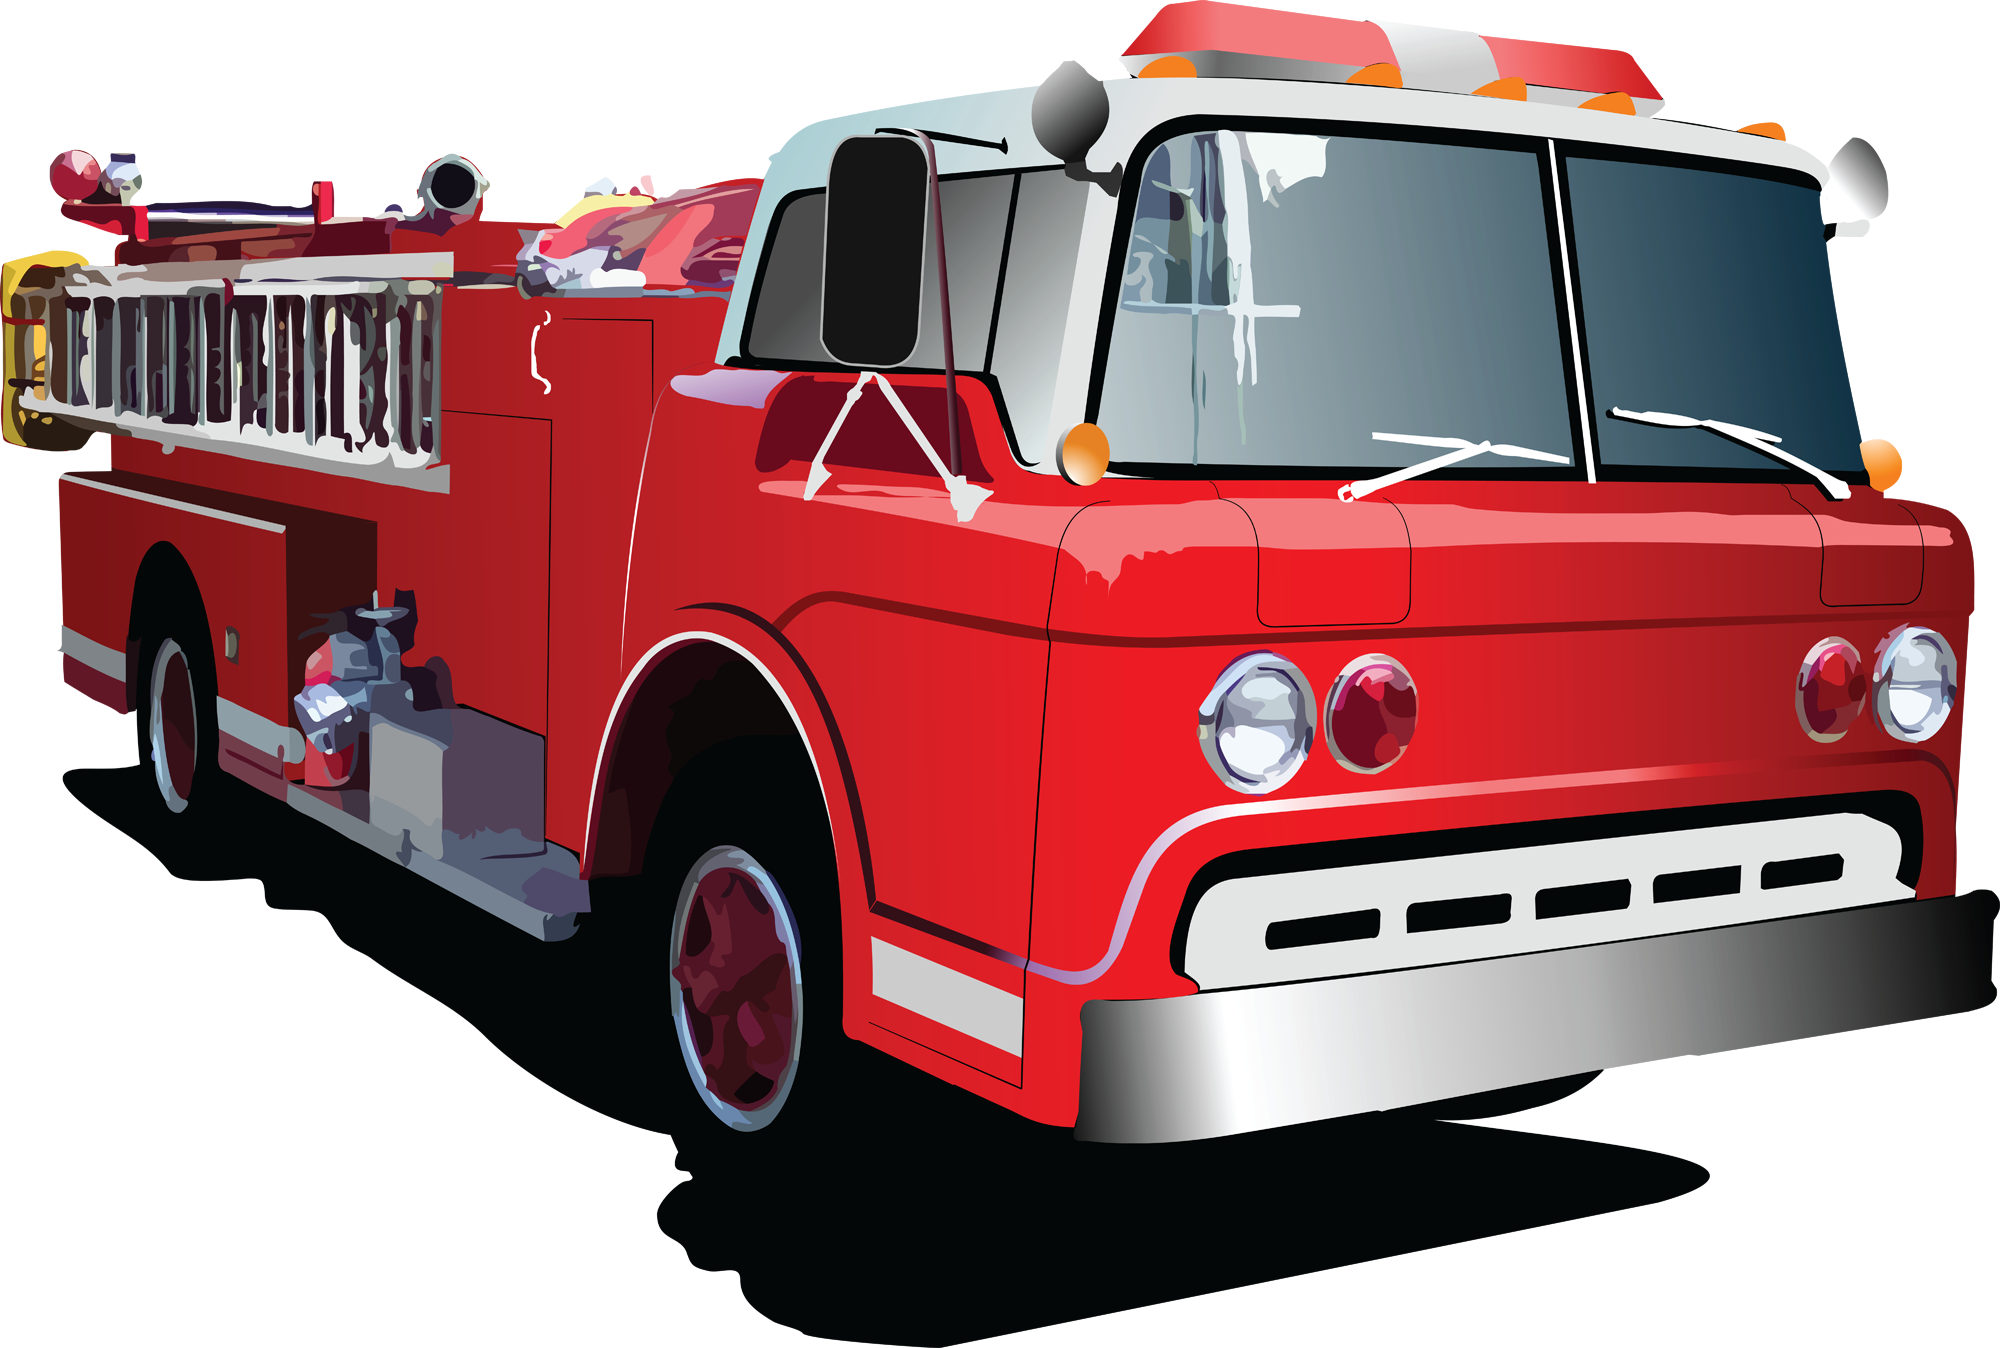 Simple fire truck clipart 🌈 Fire Truck clipart simple - Penc